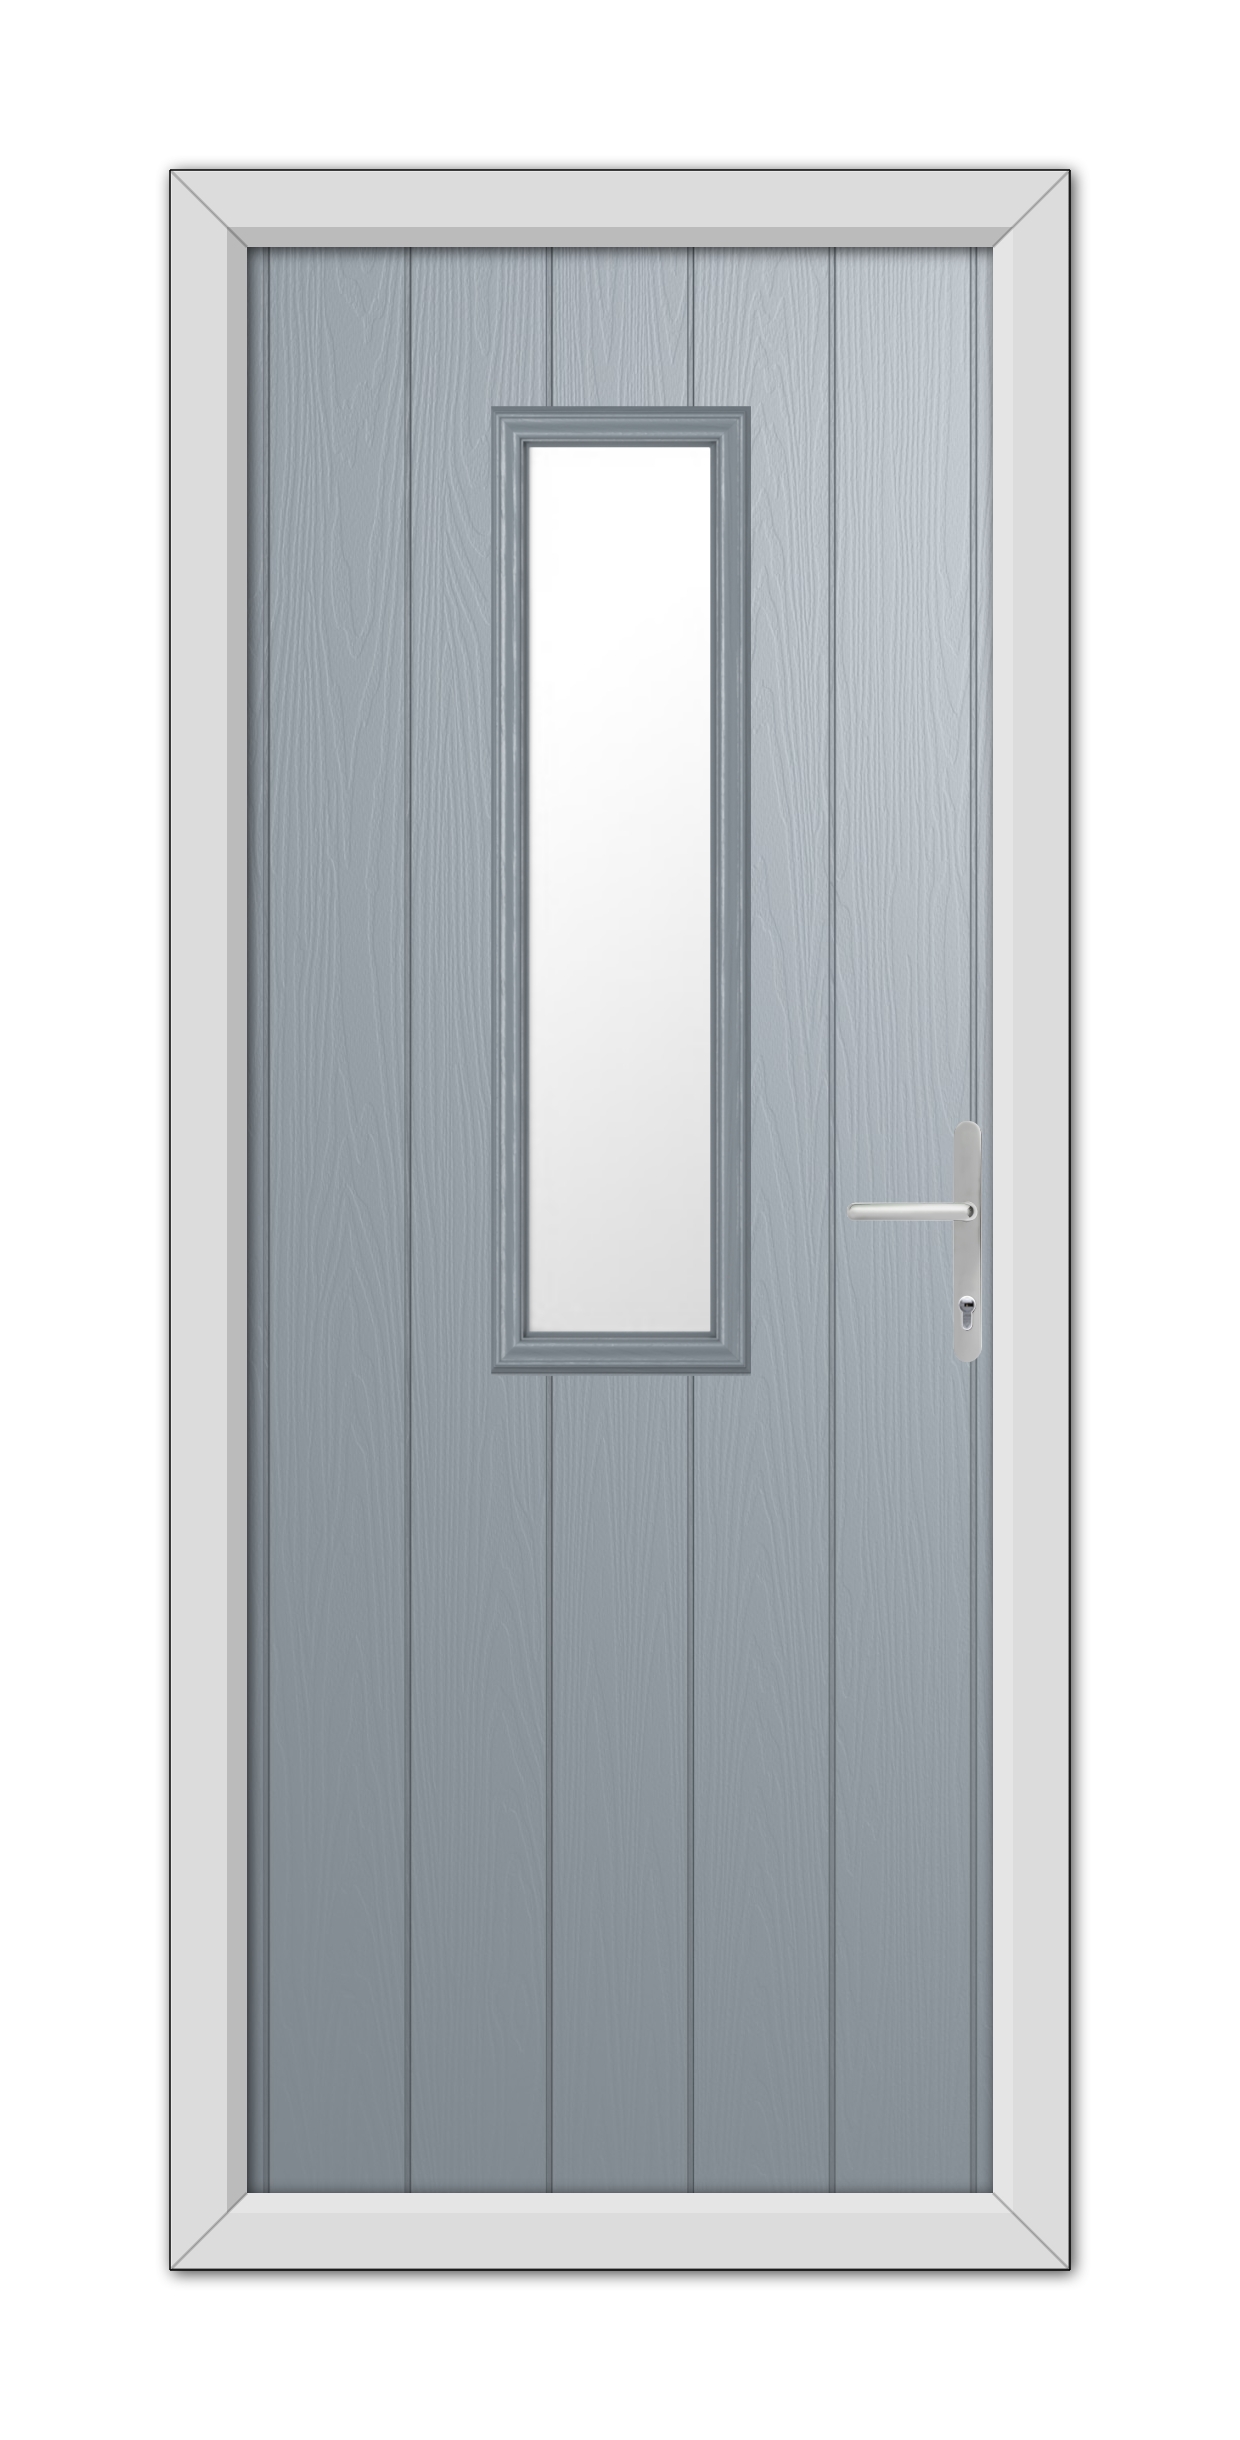 A modern French Grey Mowbray Composite Door with a vertical rectangular window and a silver handle set in a white door frame.